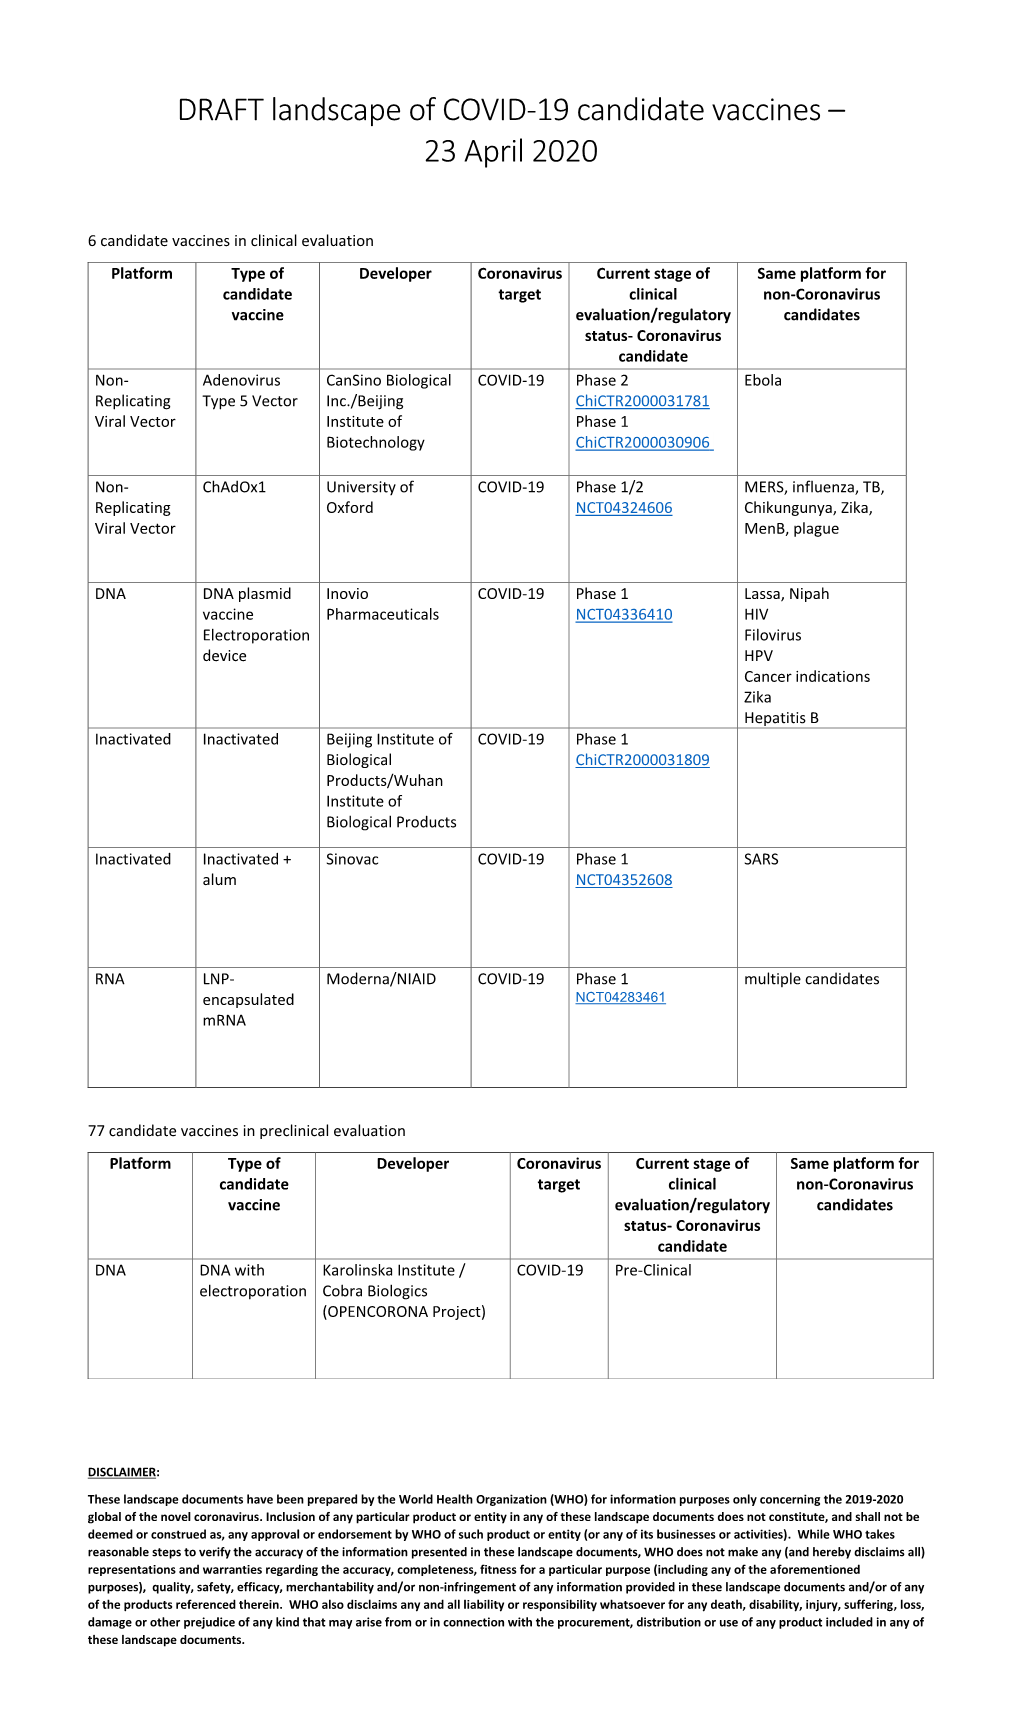 DRAFT Landscape of COVID-19 Candidate Vaccines – 23 April 2020